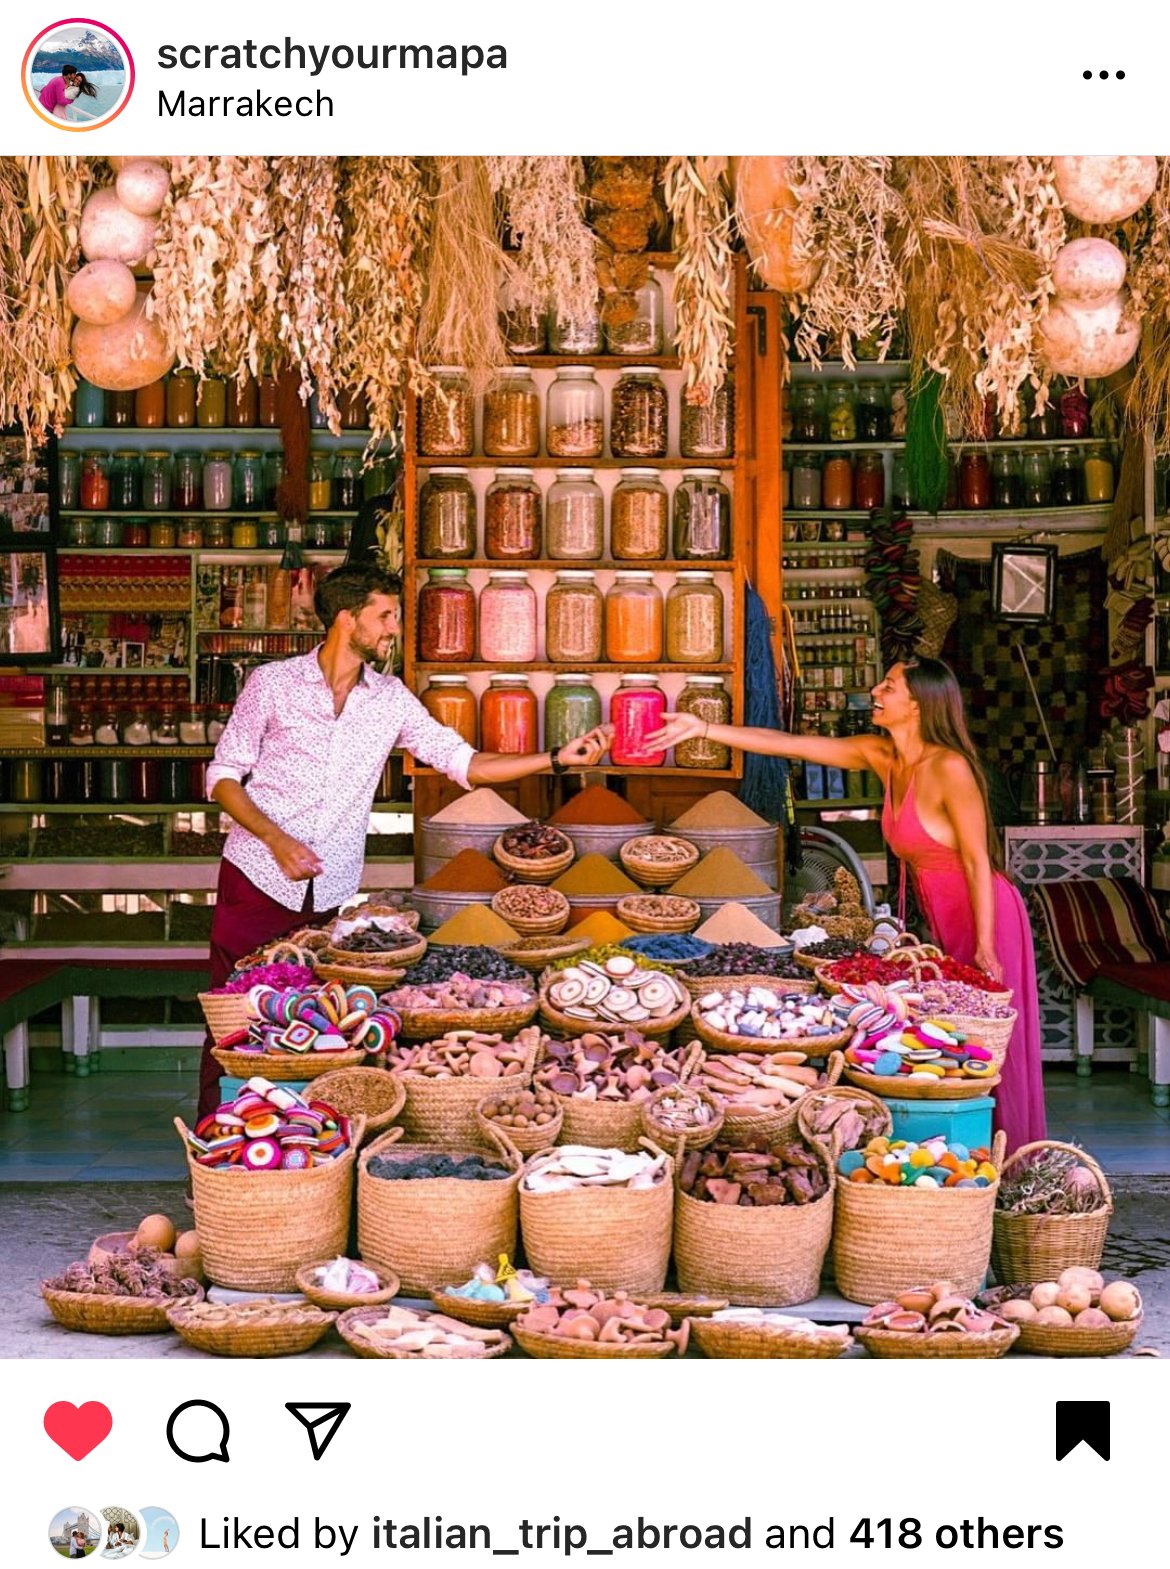 Spice Market- things to do in Marrakech